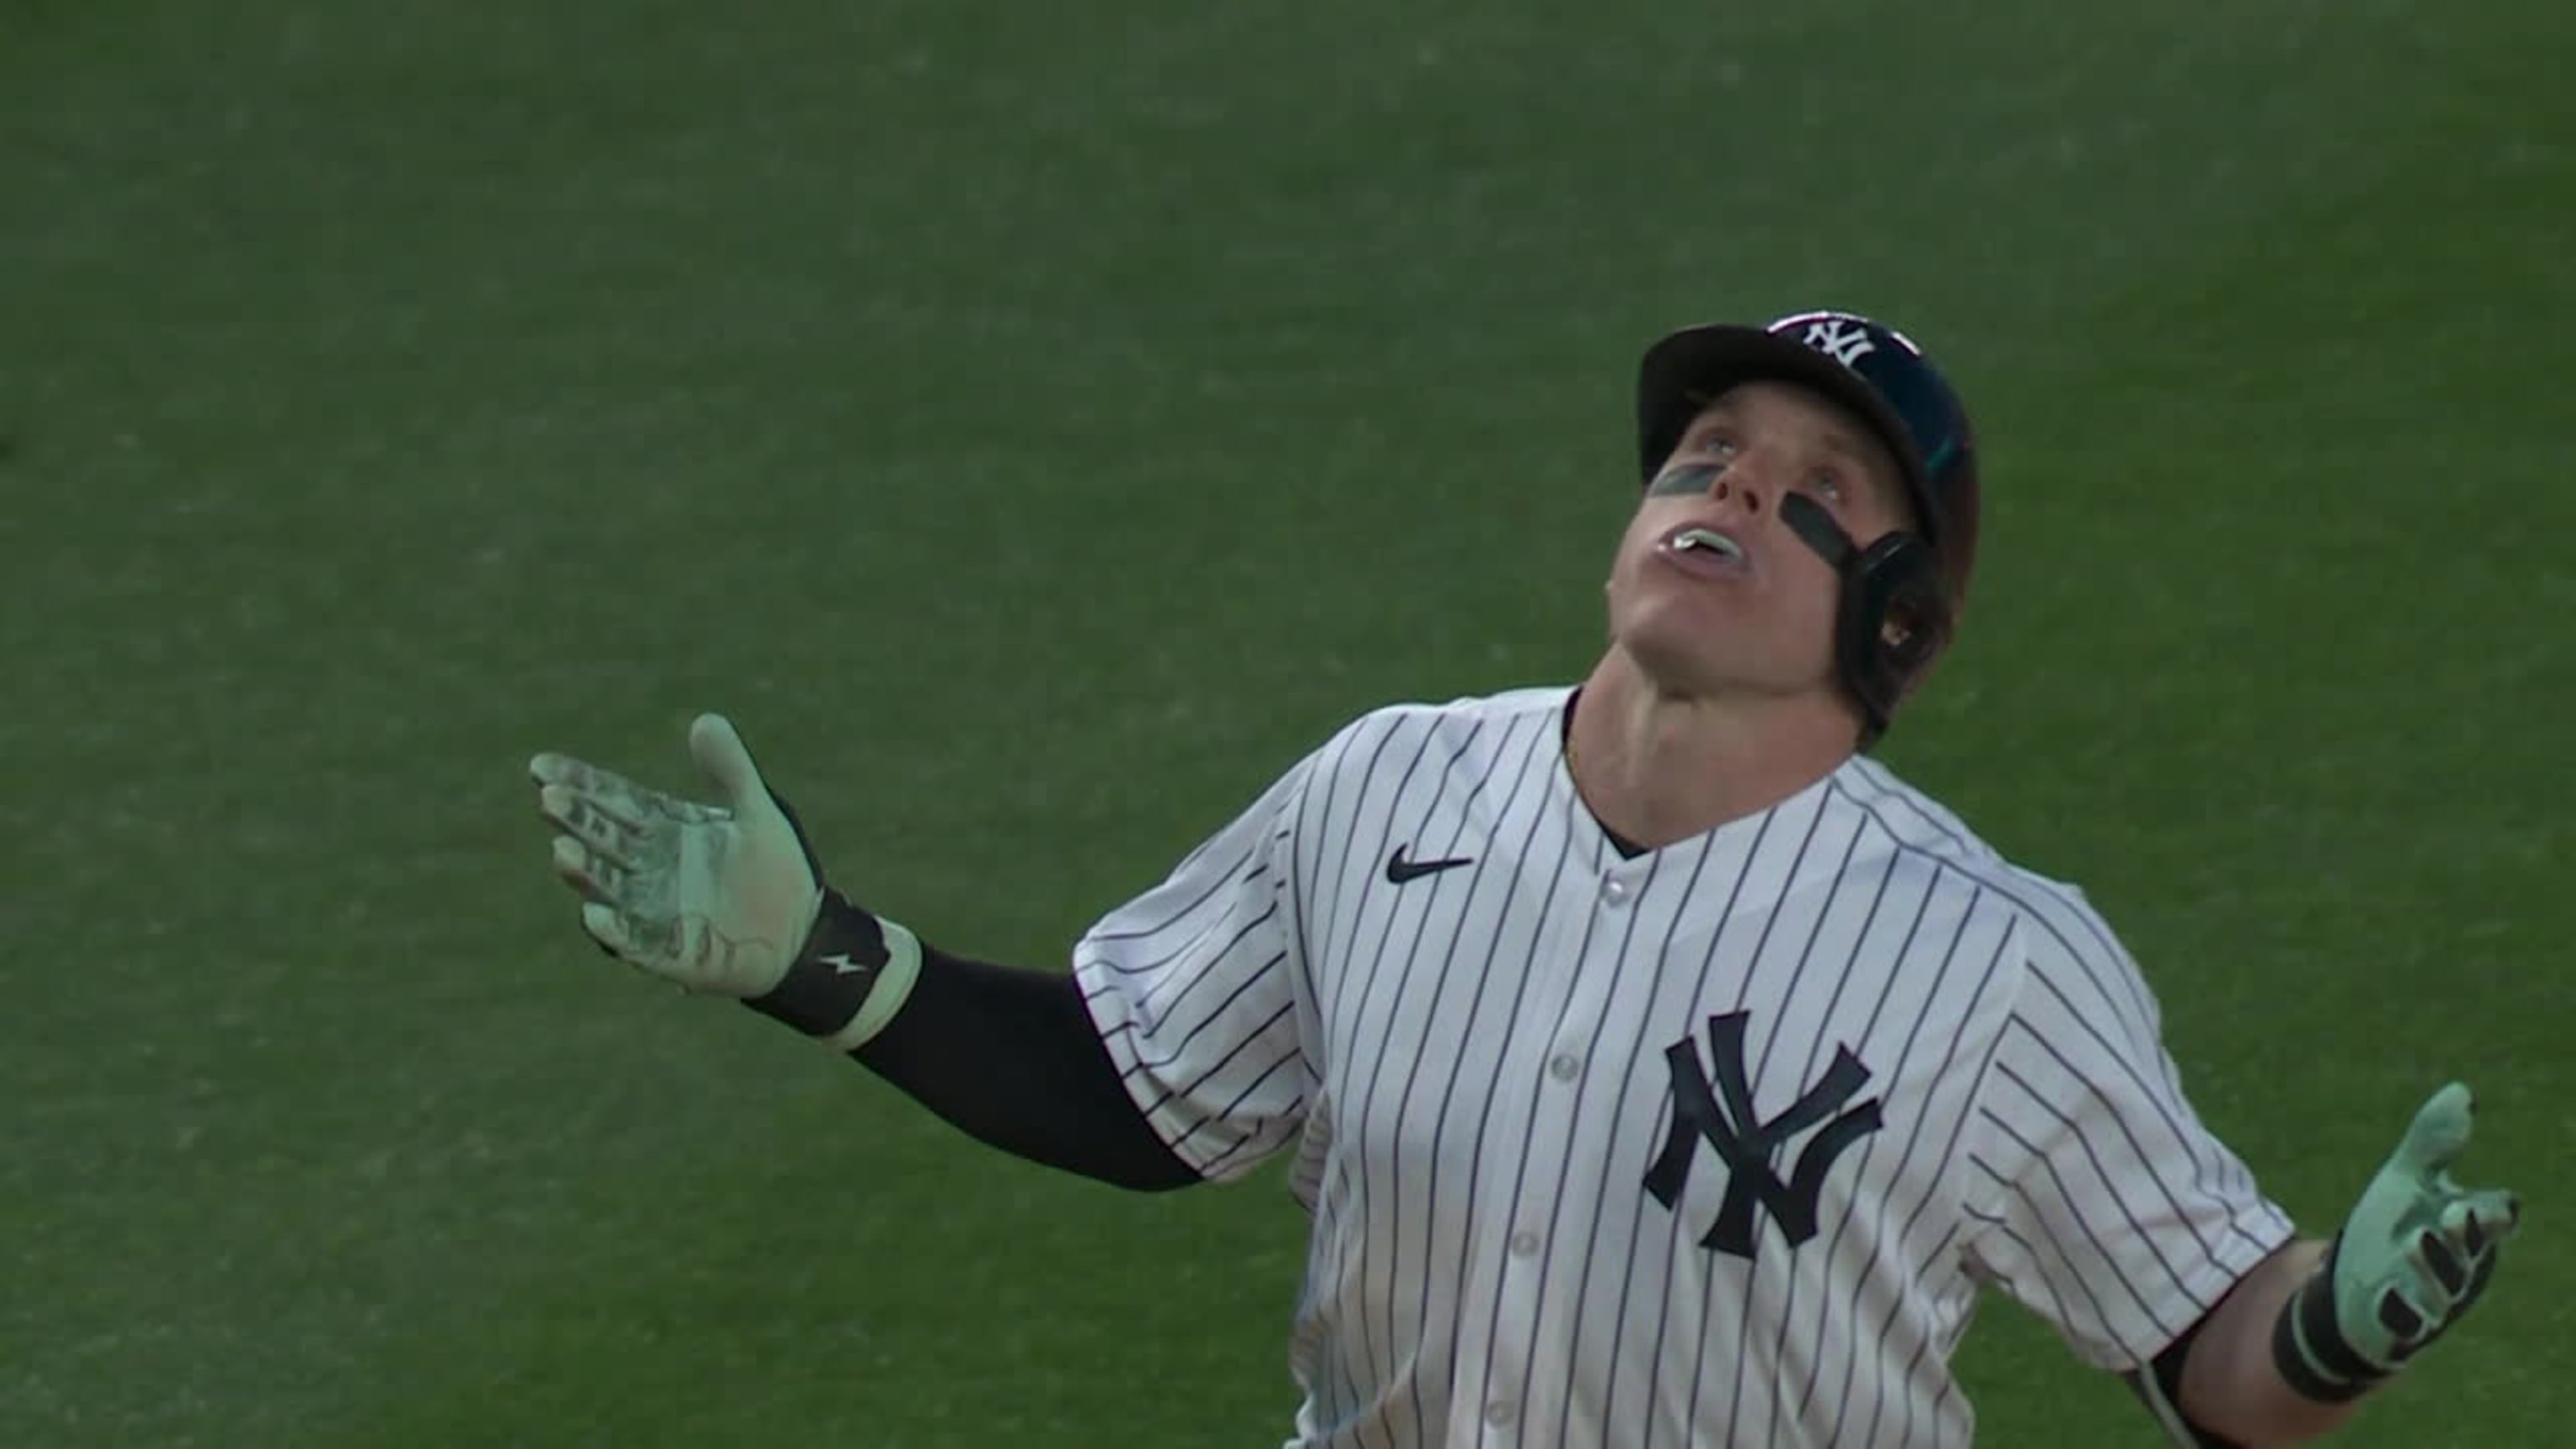 Aaron Judge walks off the Rays with an RBI to secure the Yankees